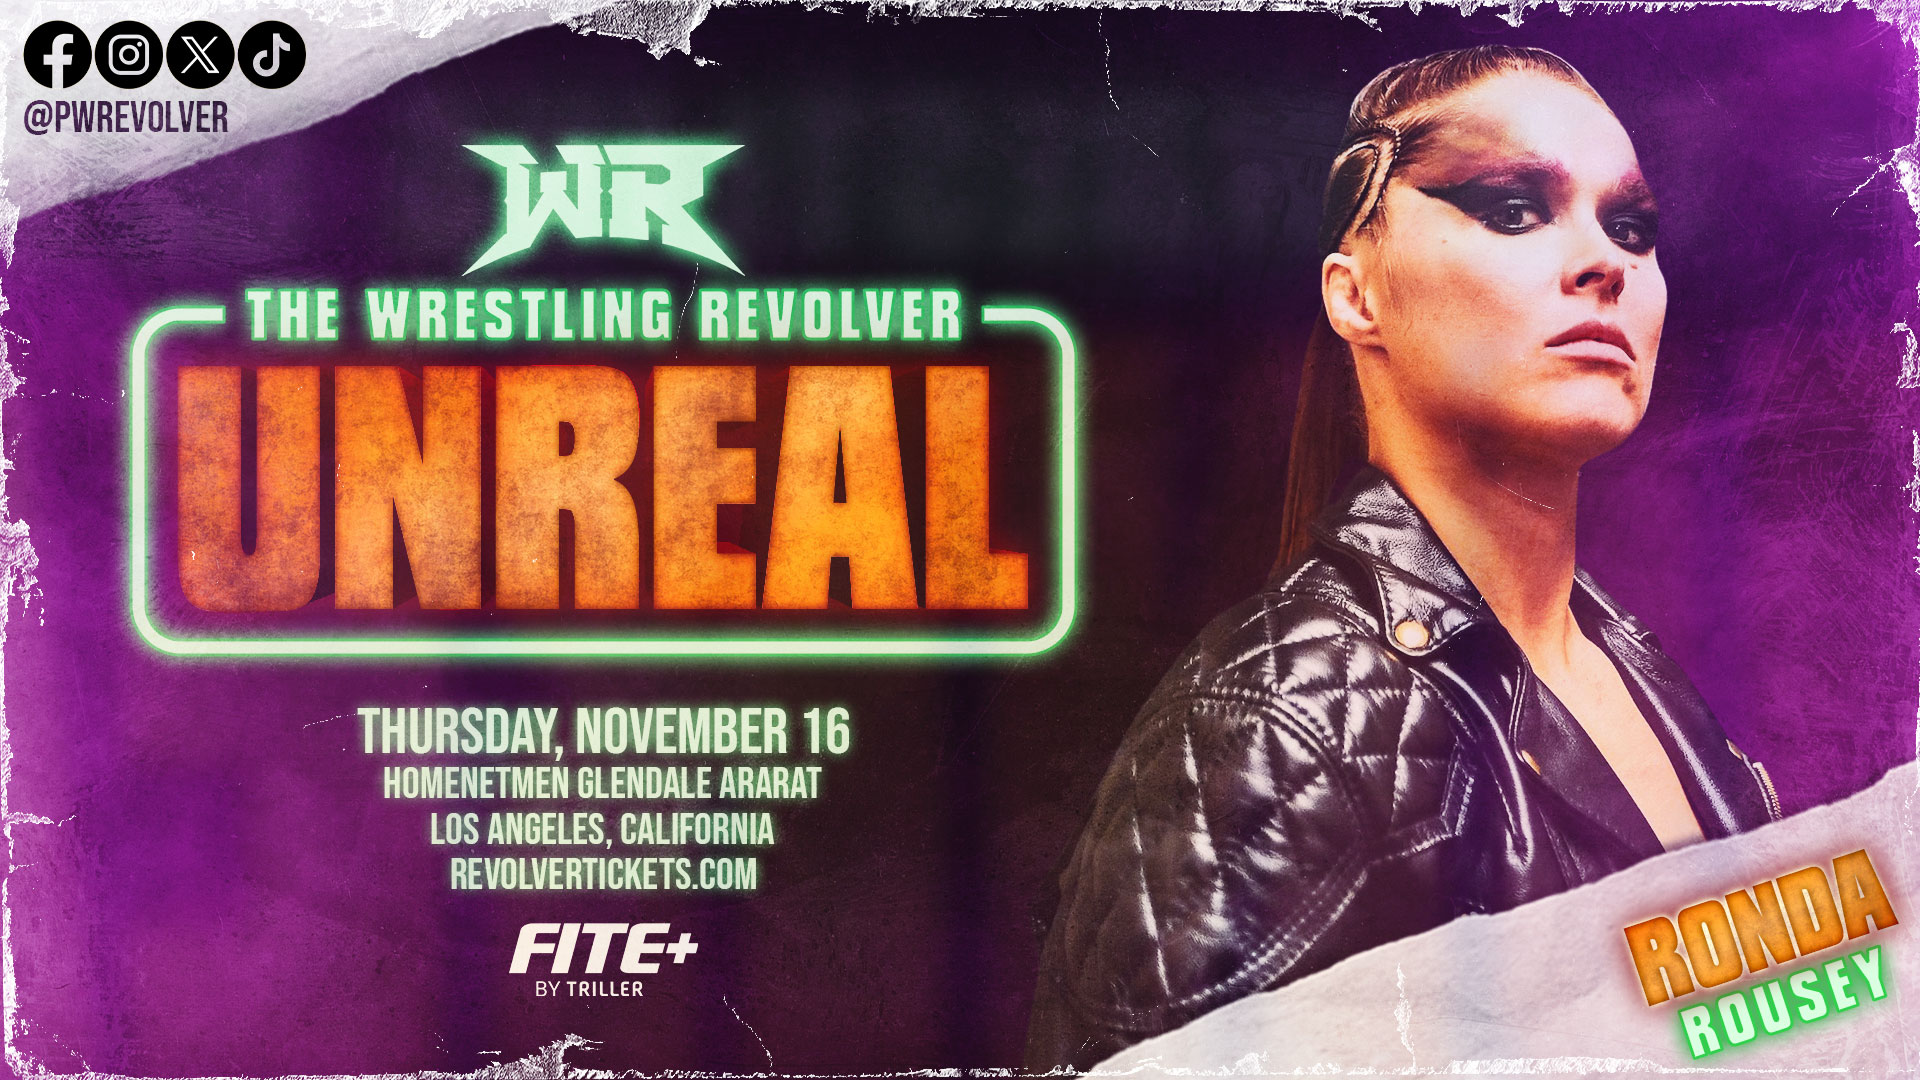 Ronda Rousey match graphic for Wrestling Revolver "Unreal" event.